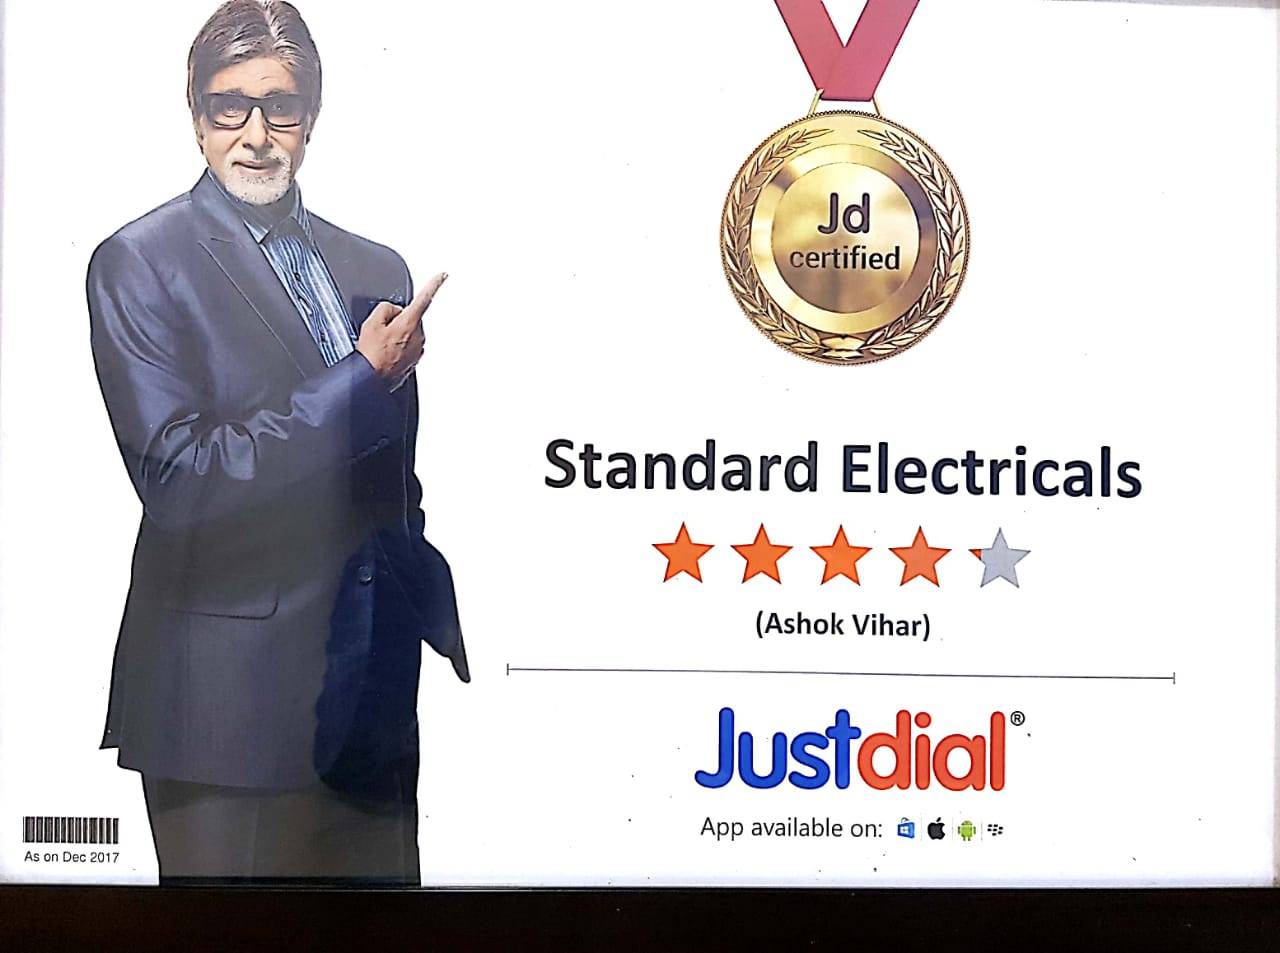 Award Certificate from Just dial to Standard Electrical Battery Estore